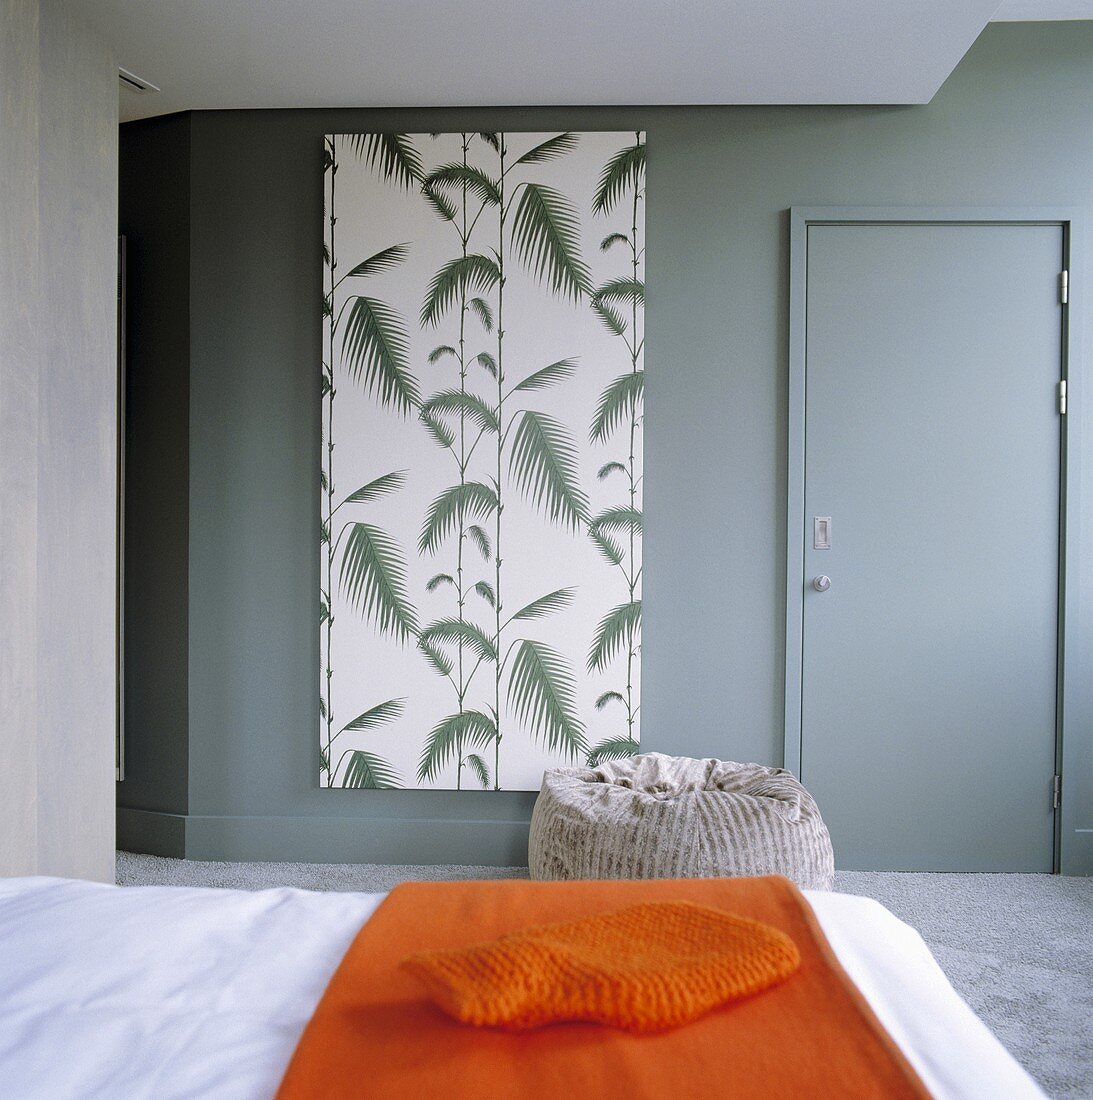 An orange quilt on a bed and a door in a grey wall